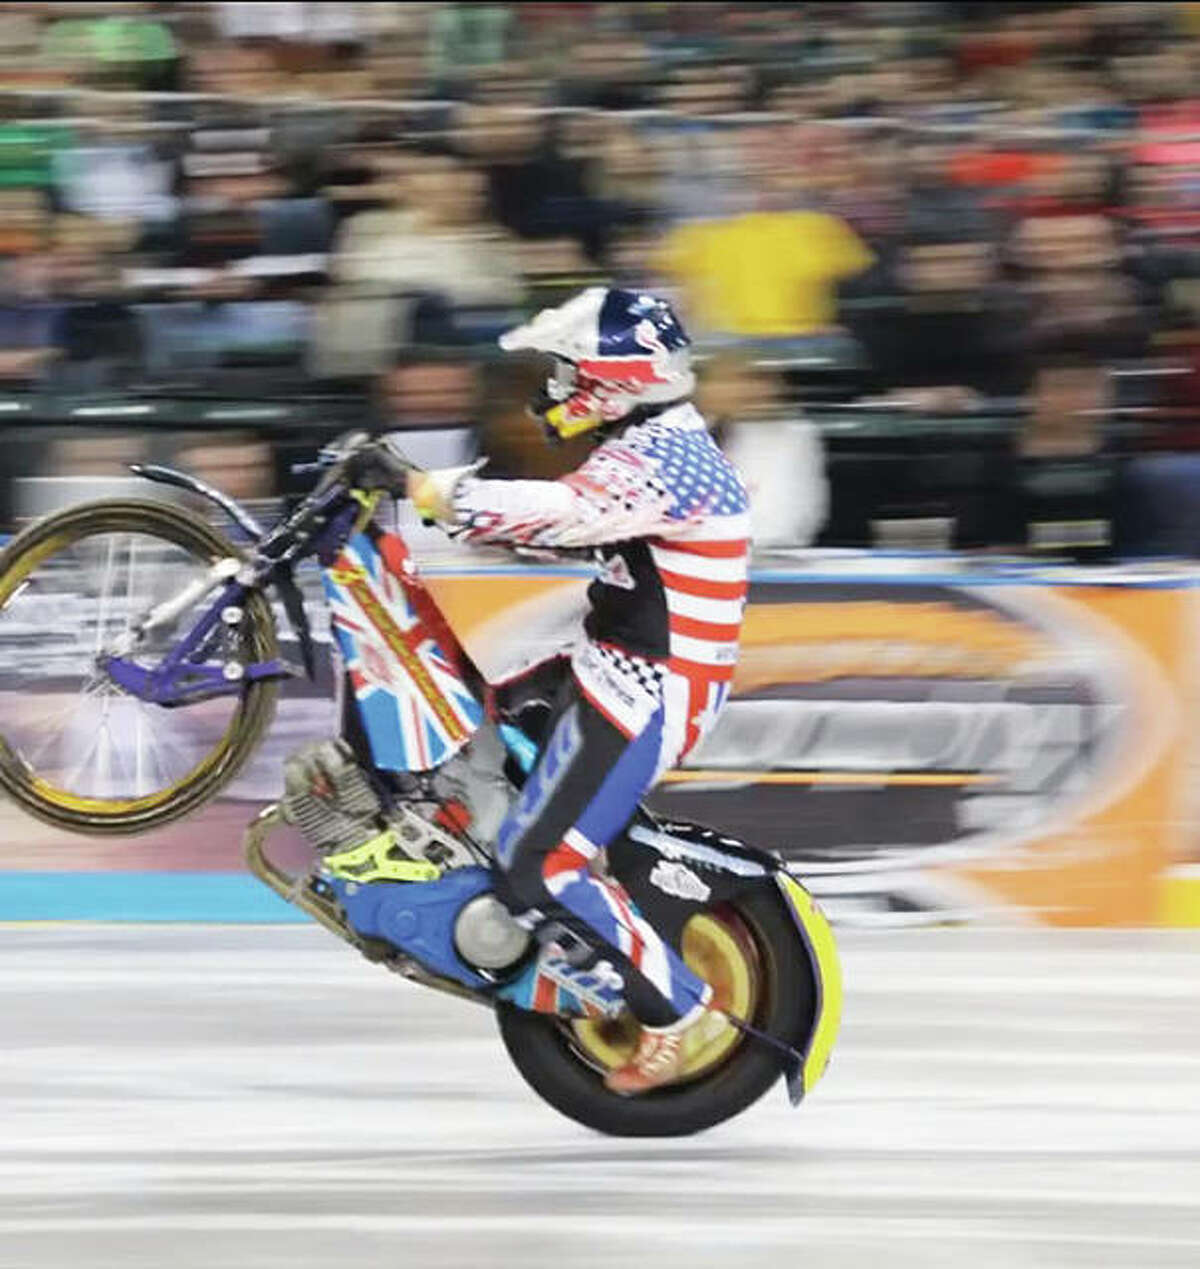 The Xtreme International Ice Racing, or XIIR (pronounced “X, Double I, R), is a professional motorcycle race held on ice, such as that utilized for a hockey game. Known as the world’s toughest professional ice race, riders modify speedway bikes and quads to compete on an indoor ice arena.